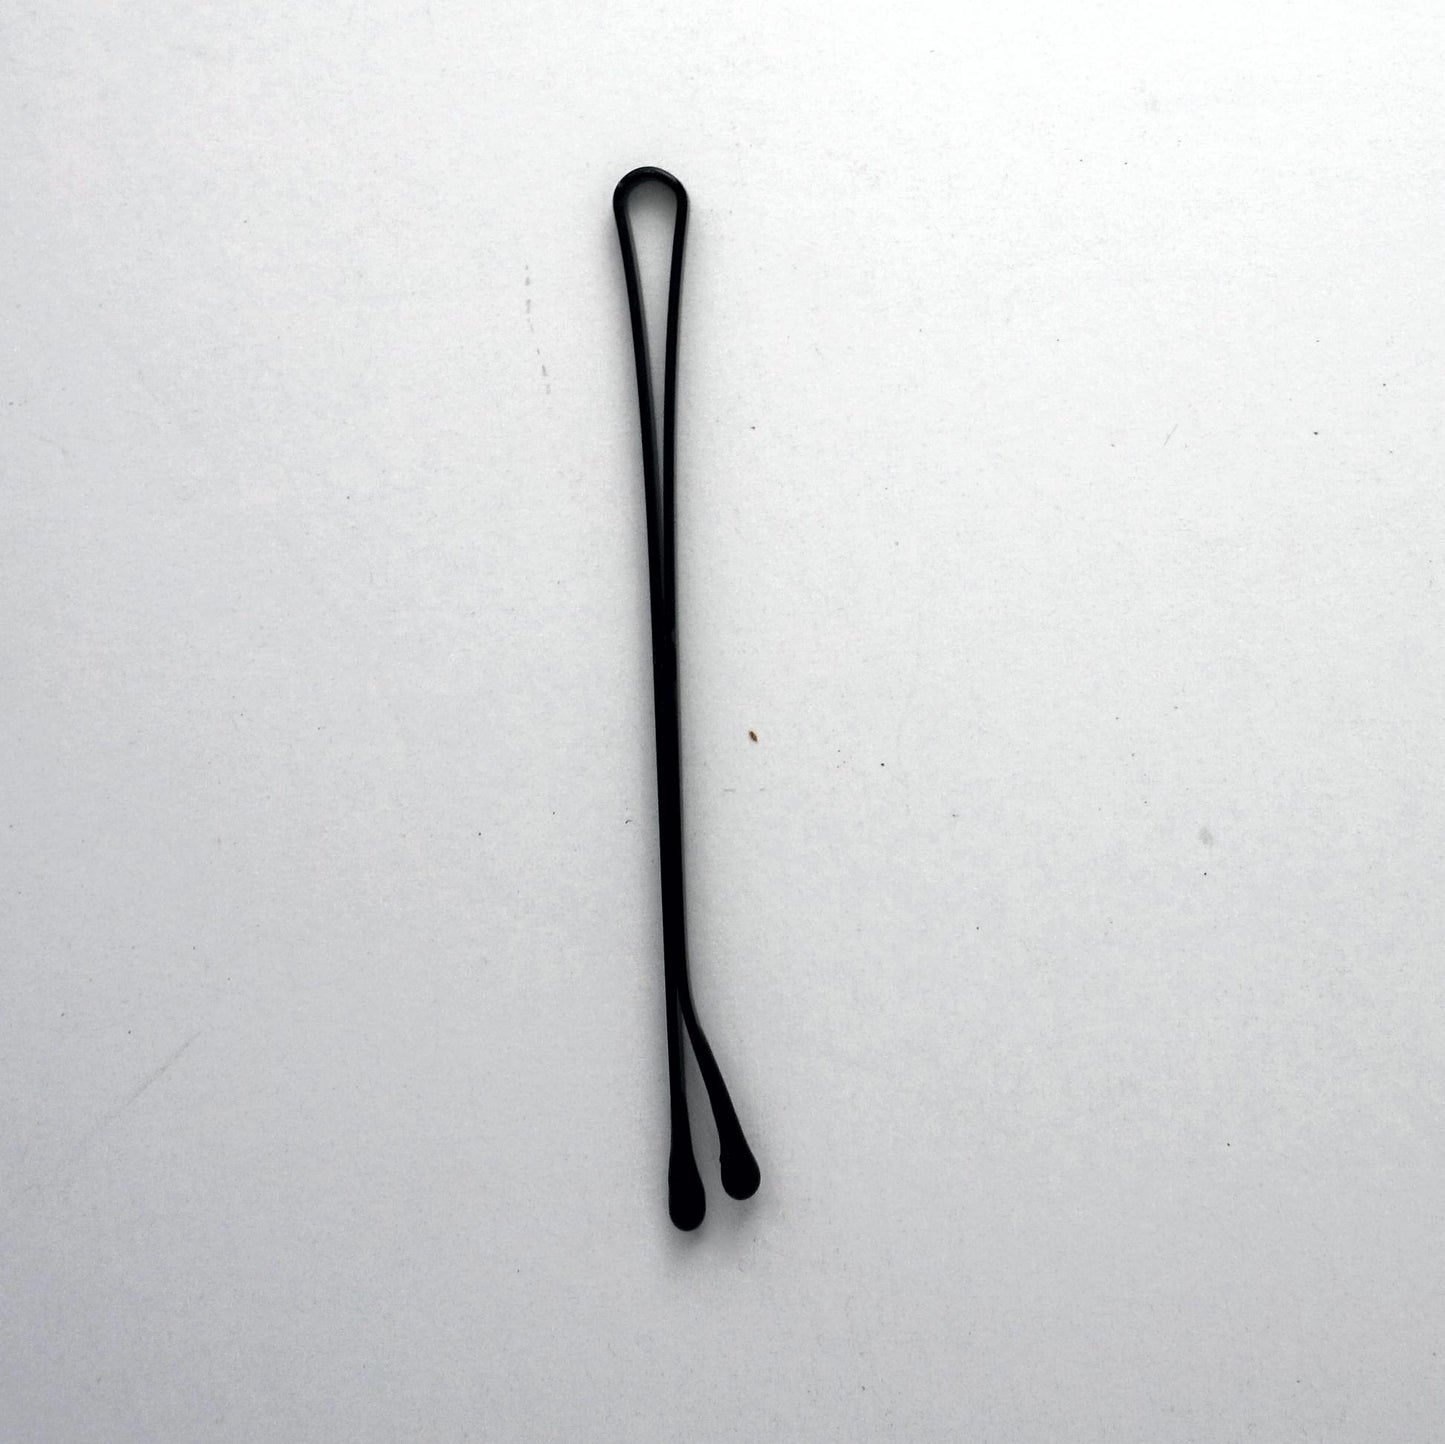 36, Black, US Made, Jumbo Bobby Pins in a Clamshell